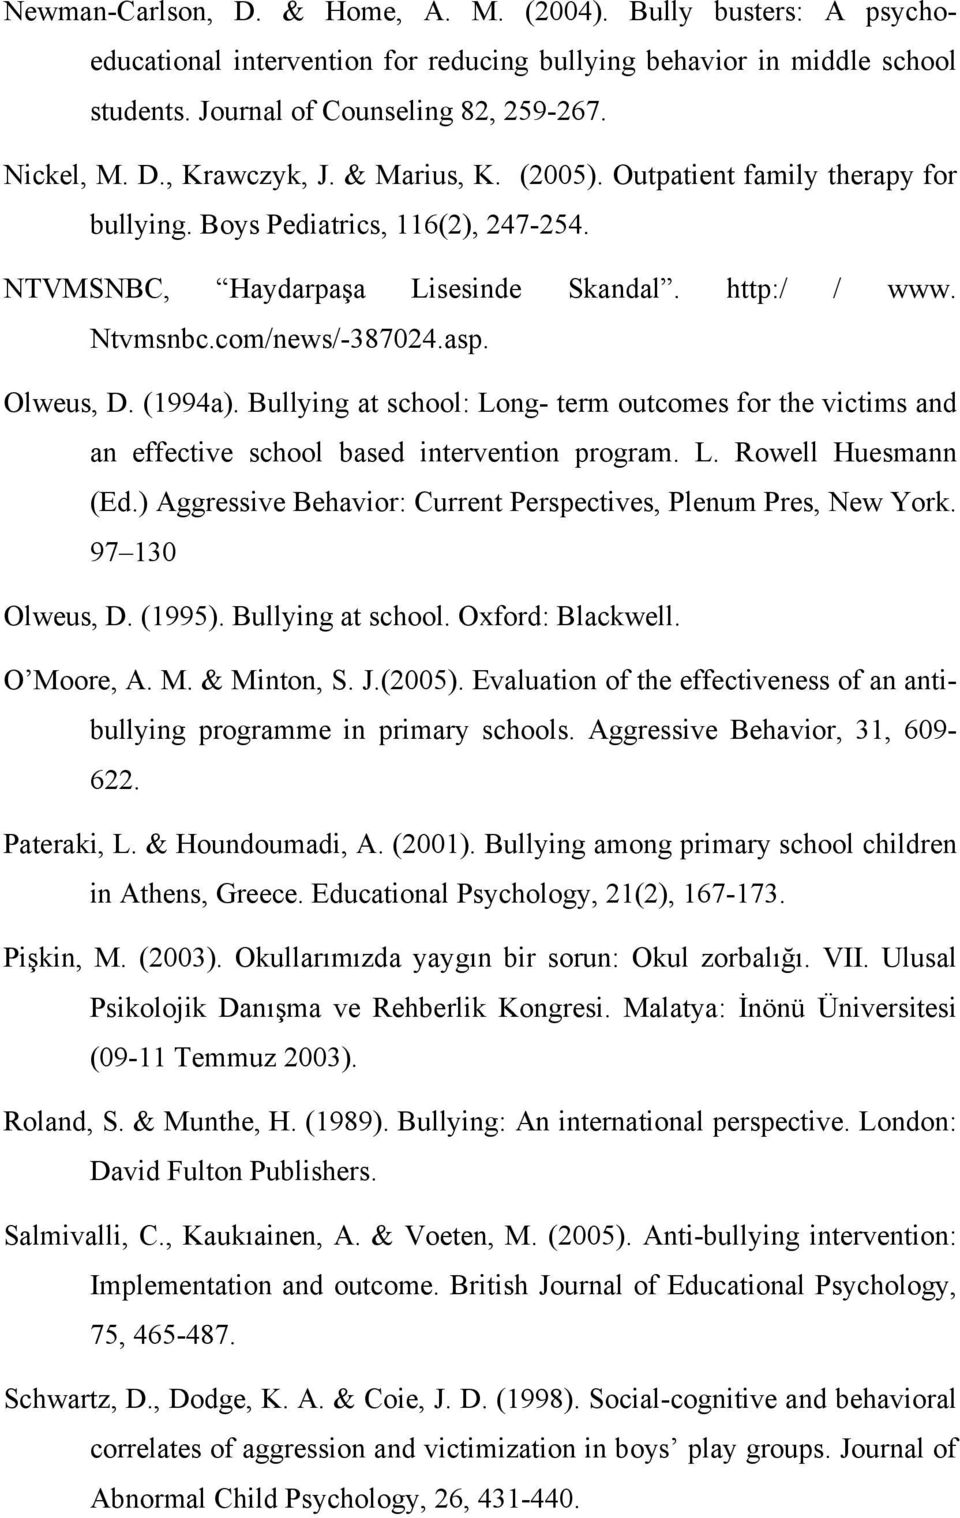 Bullying at school: Long- term outcomes for the victims and an effective school based intervention program. L. Rowell Huesmann (Ed.) Aggressive Behavior: Current Perspectives, Plenum Pres, New York.